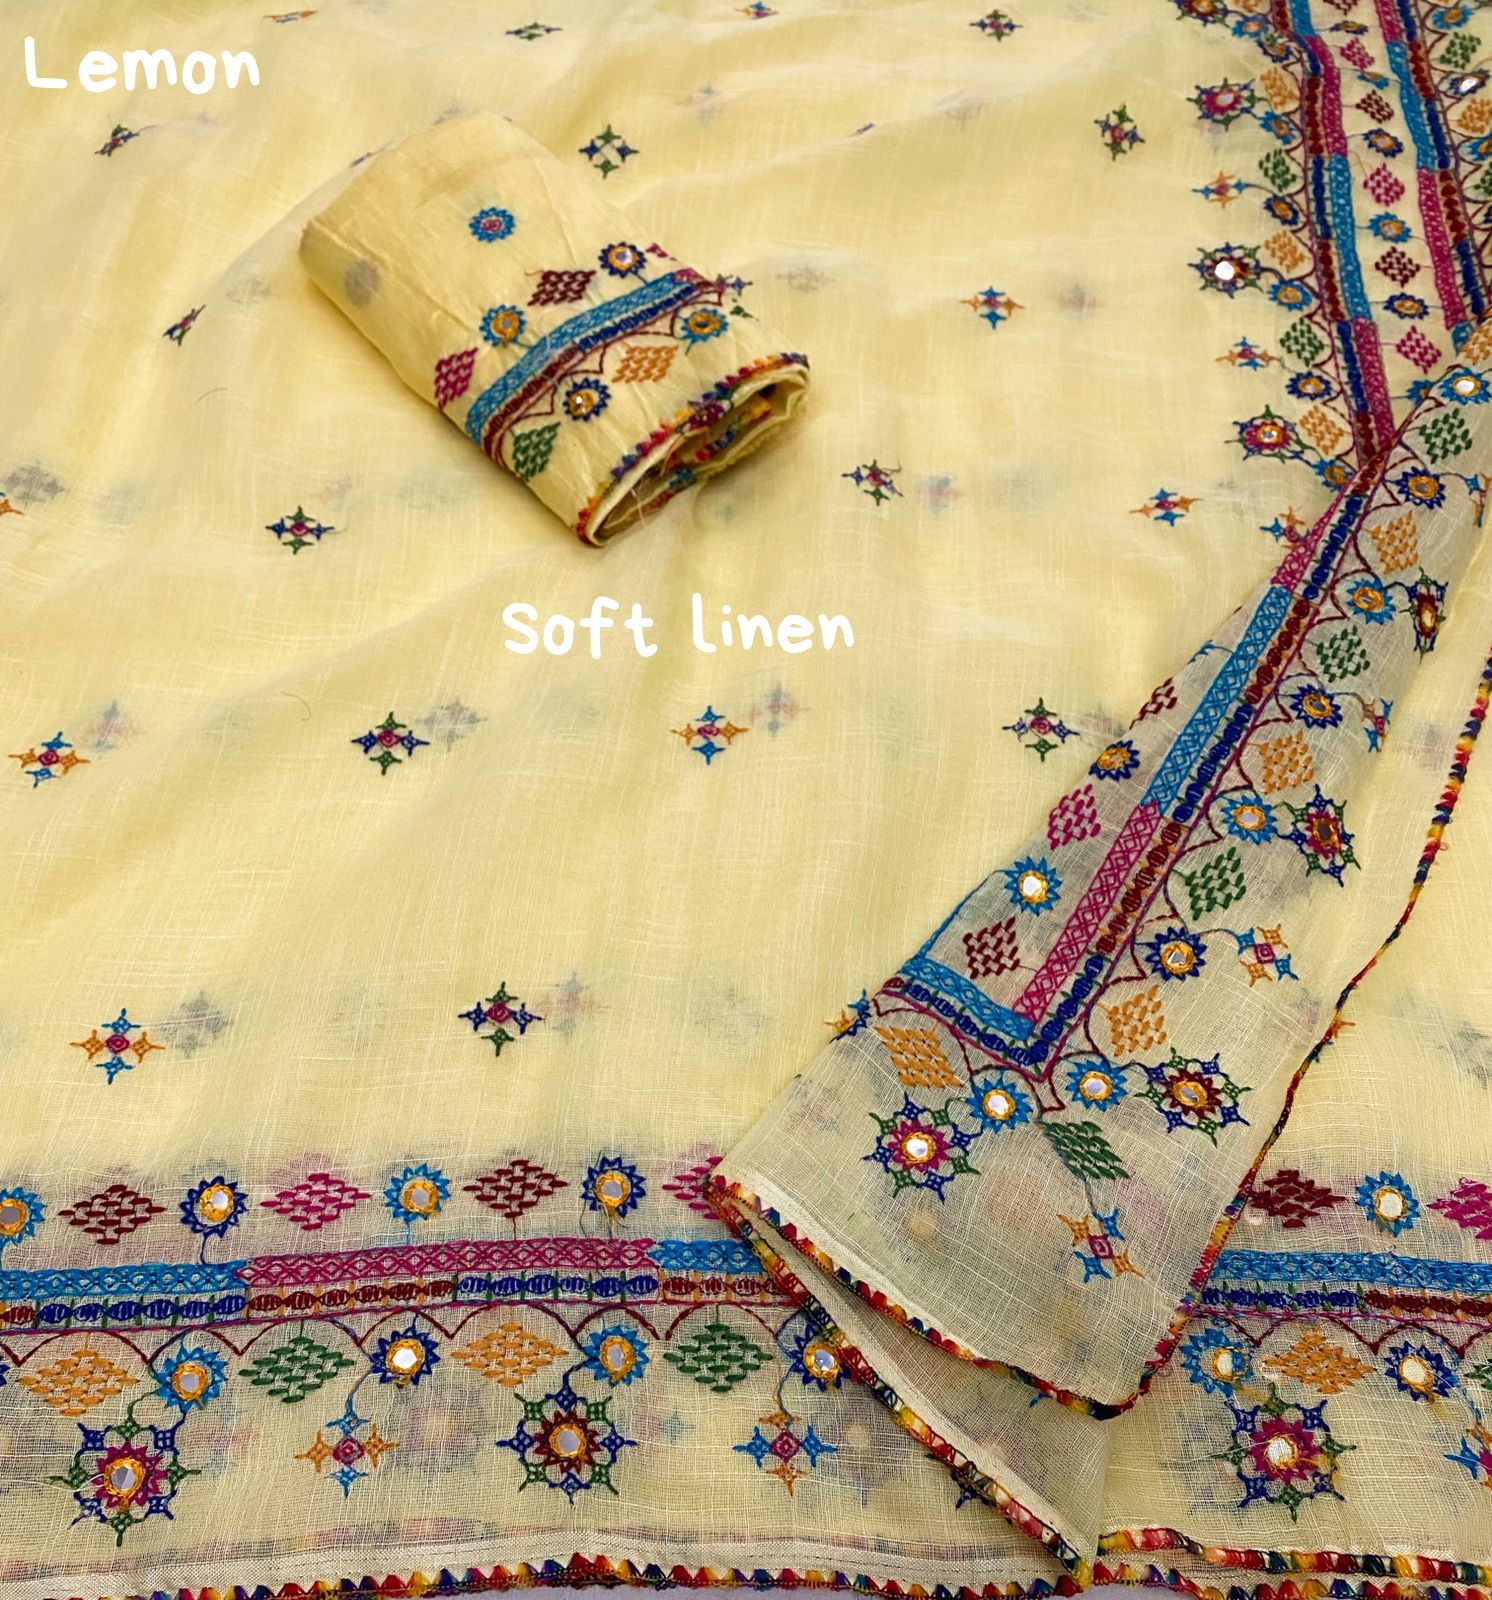 Pure Linen Designer Saree with Embroidery & Mirror work - Yellow